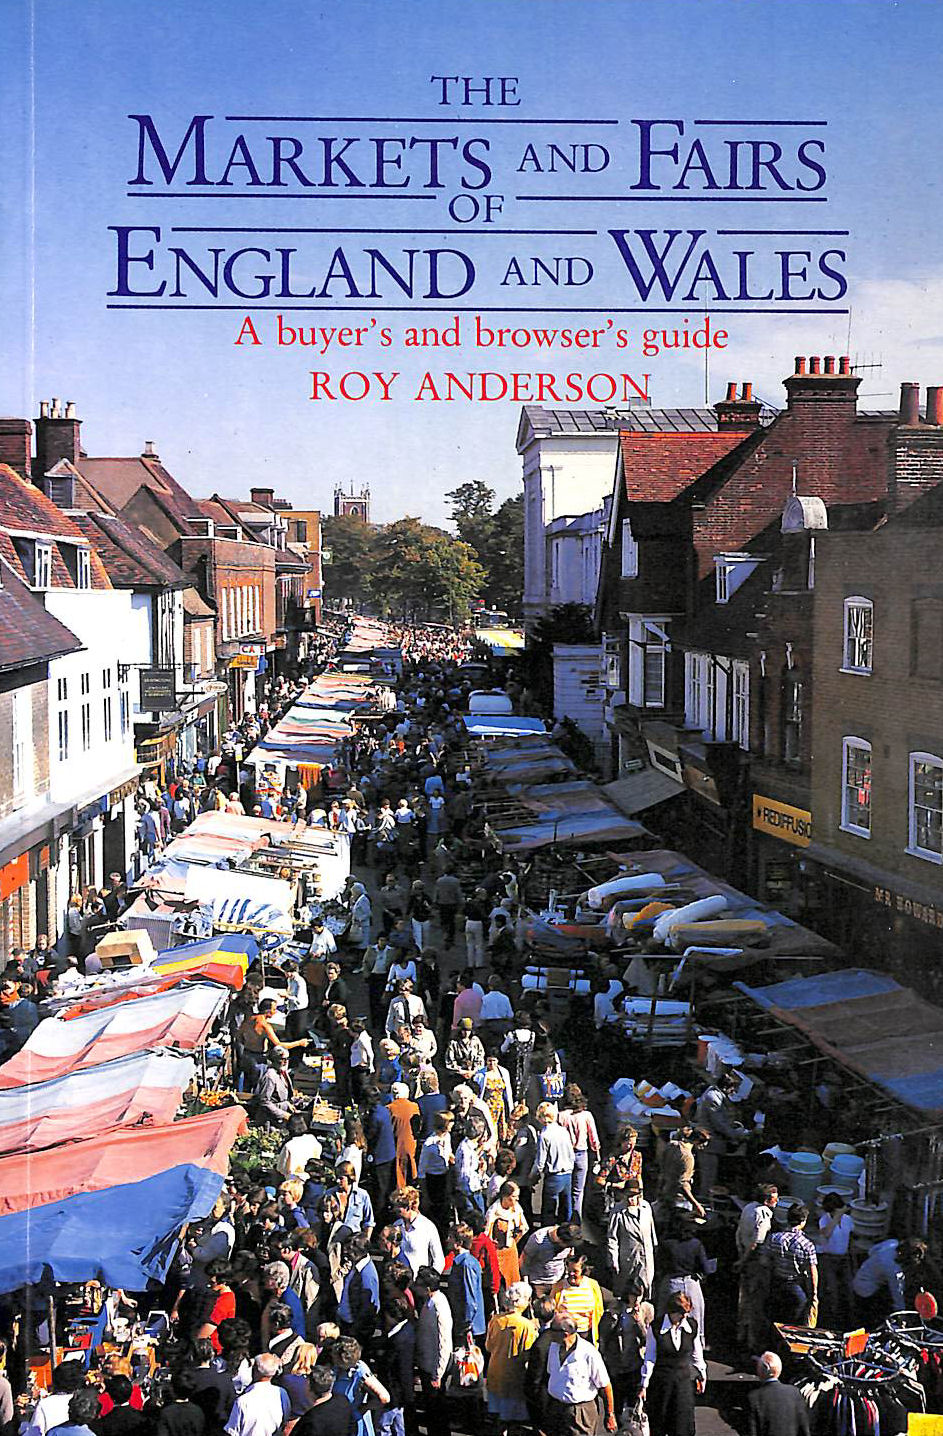 ANDERSON, R. C. - The Markets and Fairs of England and Wales